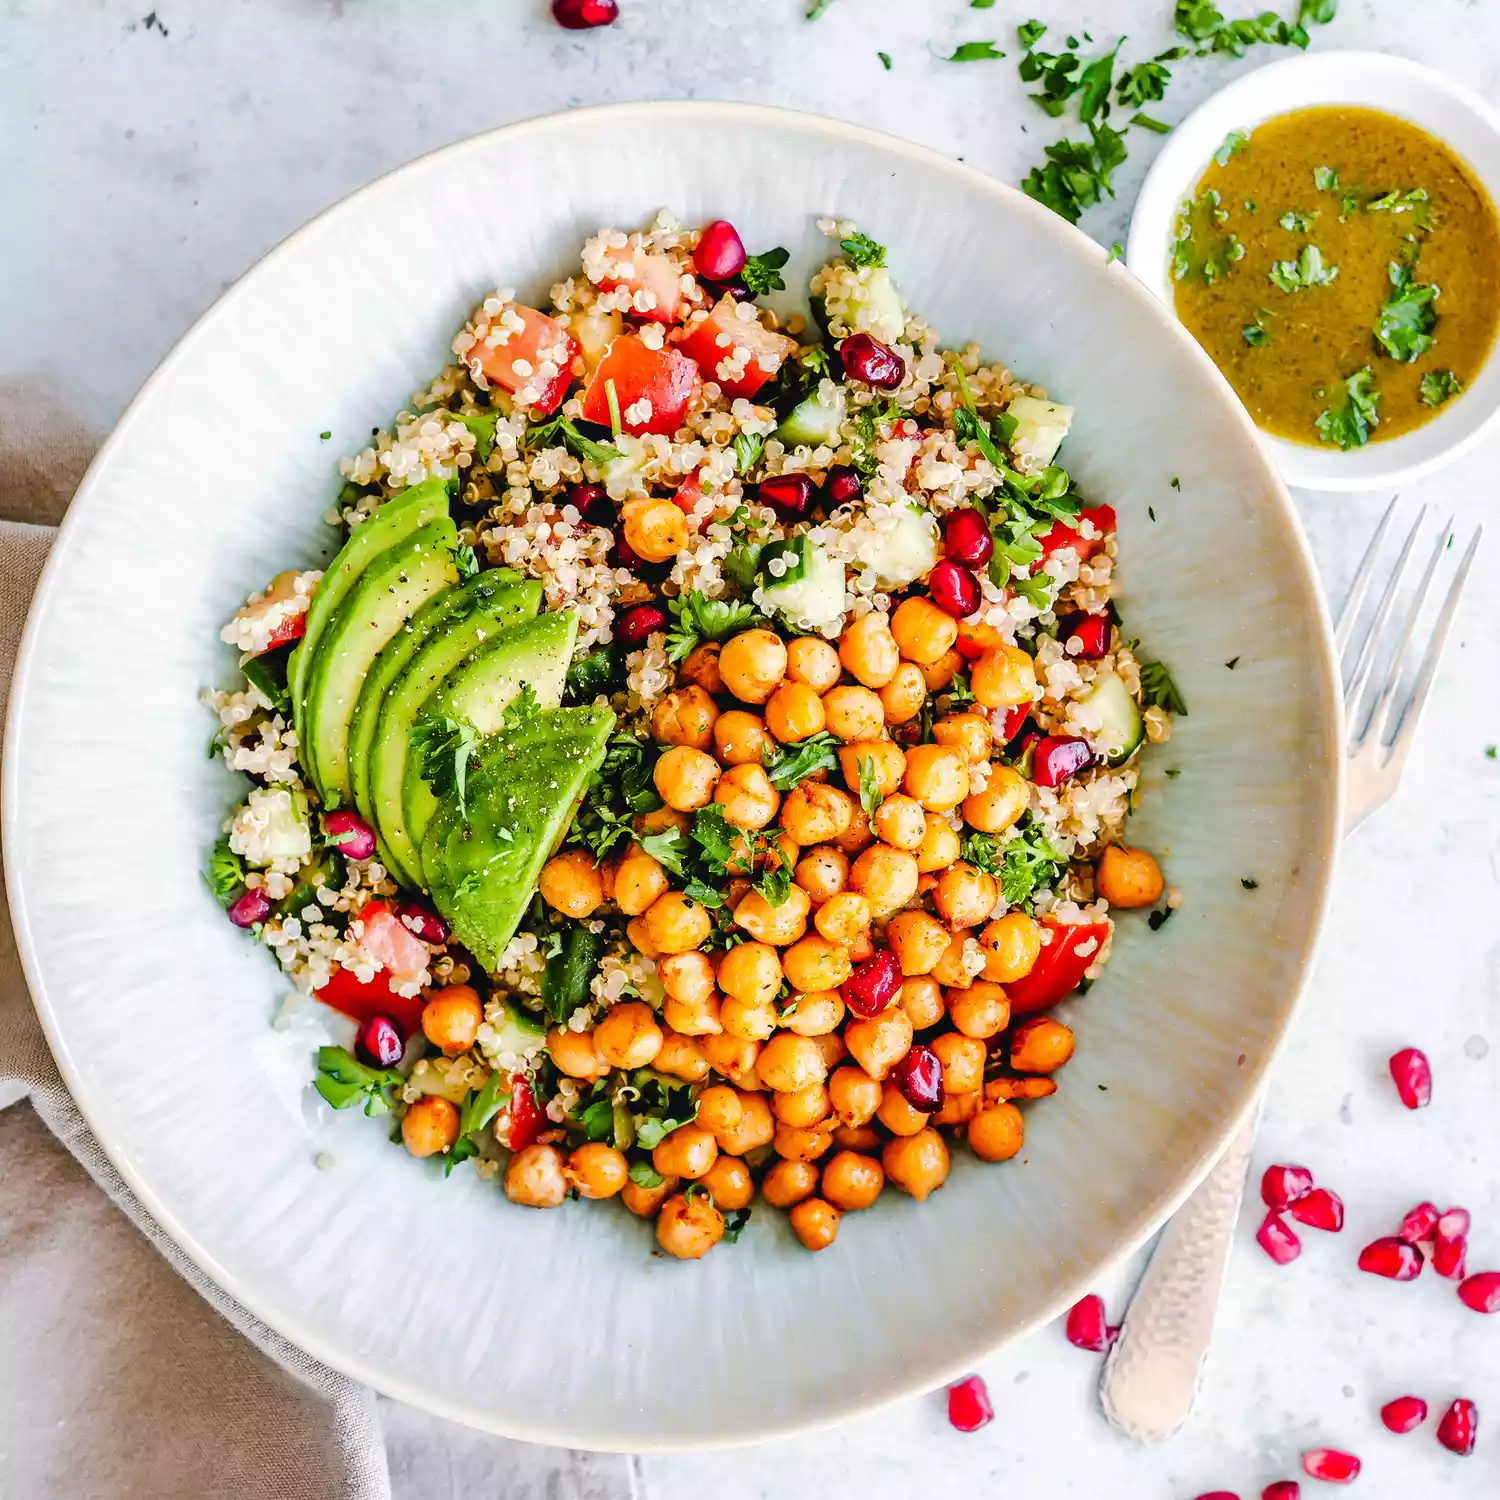 A bowl of chickpea salad with quinoa and avocado. Dressing on the side.